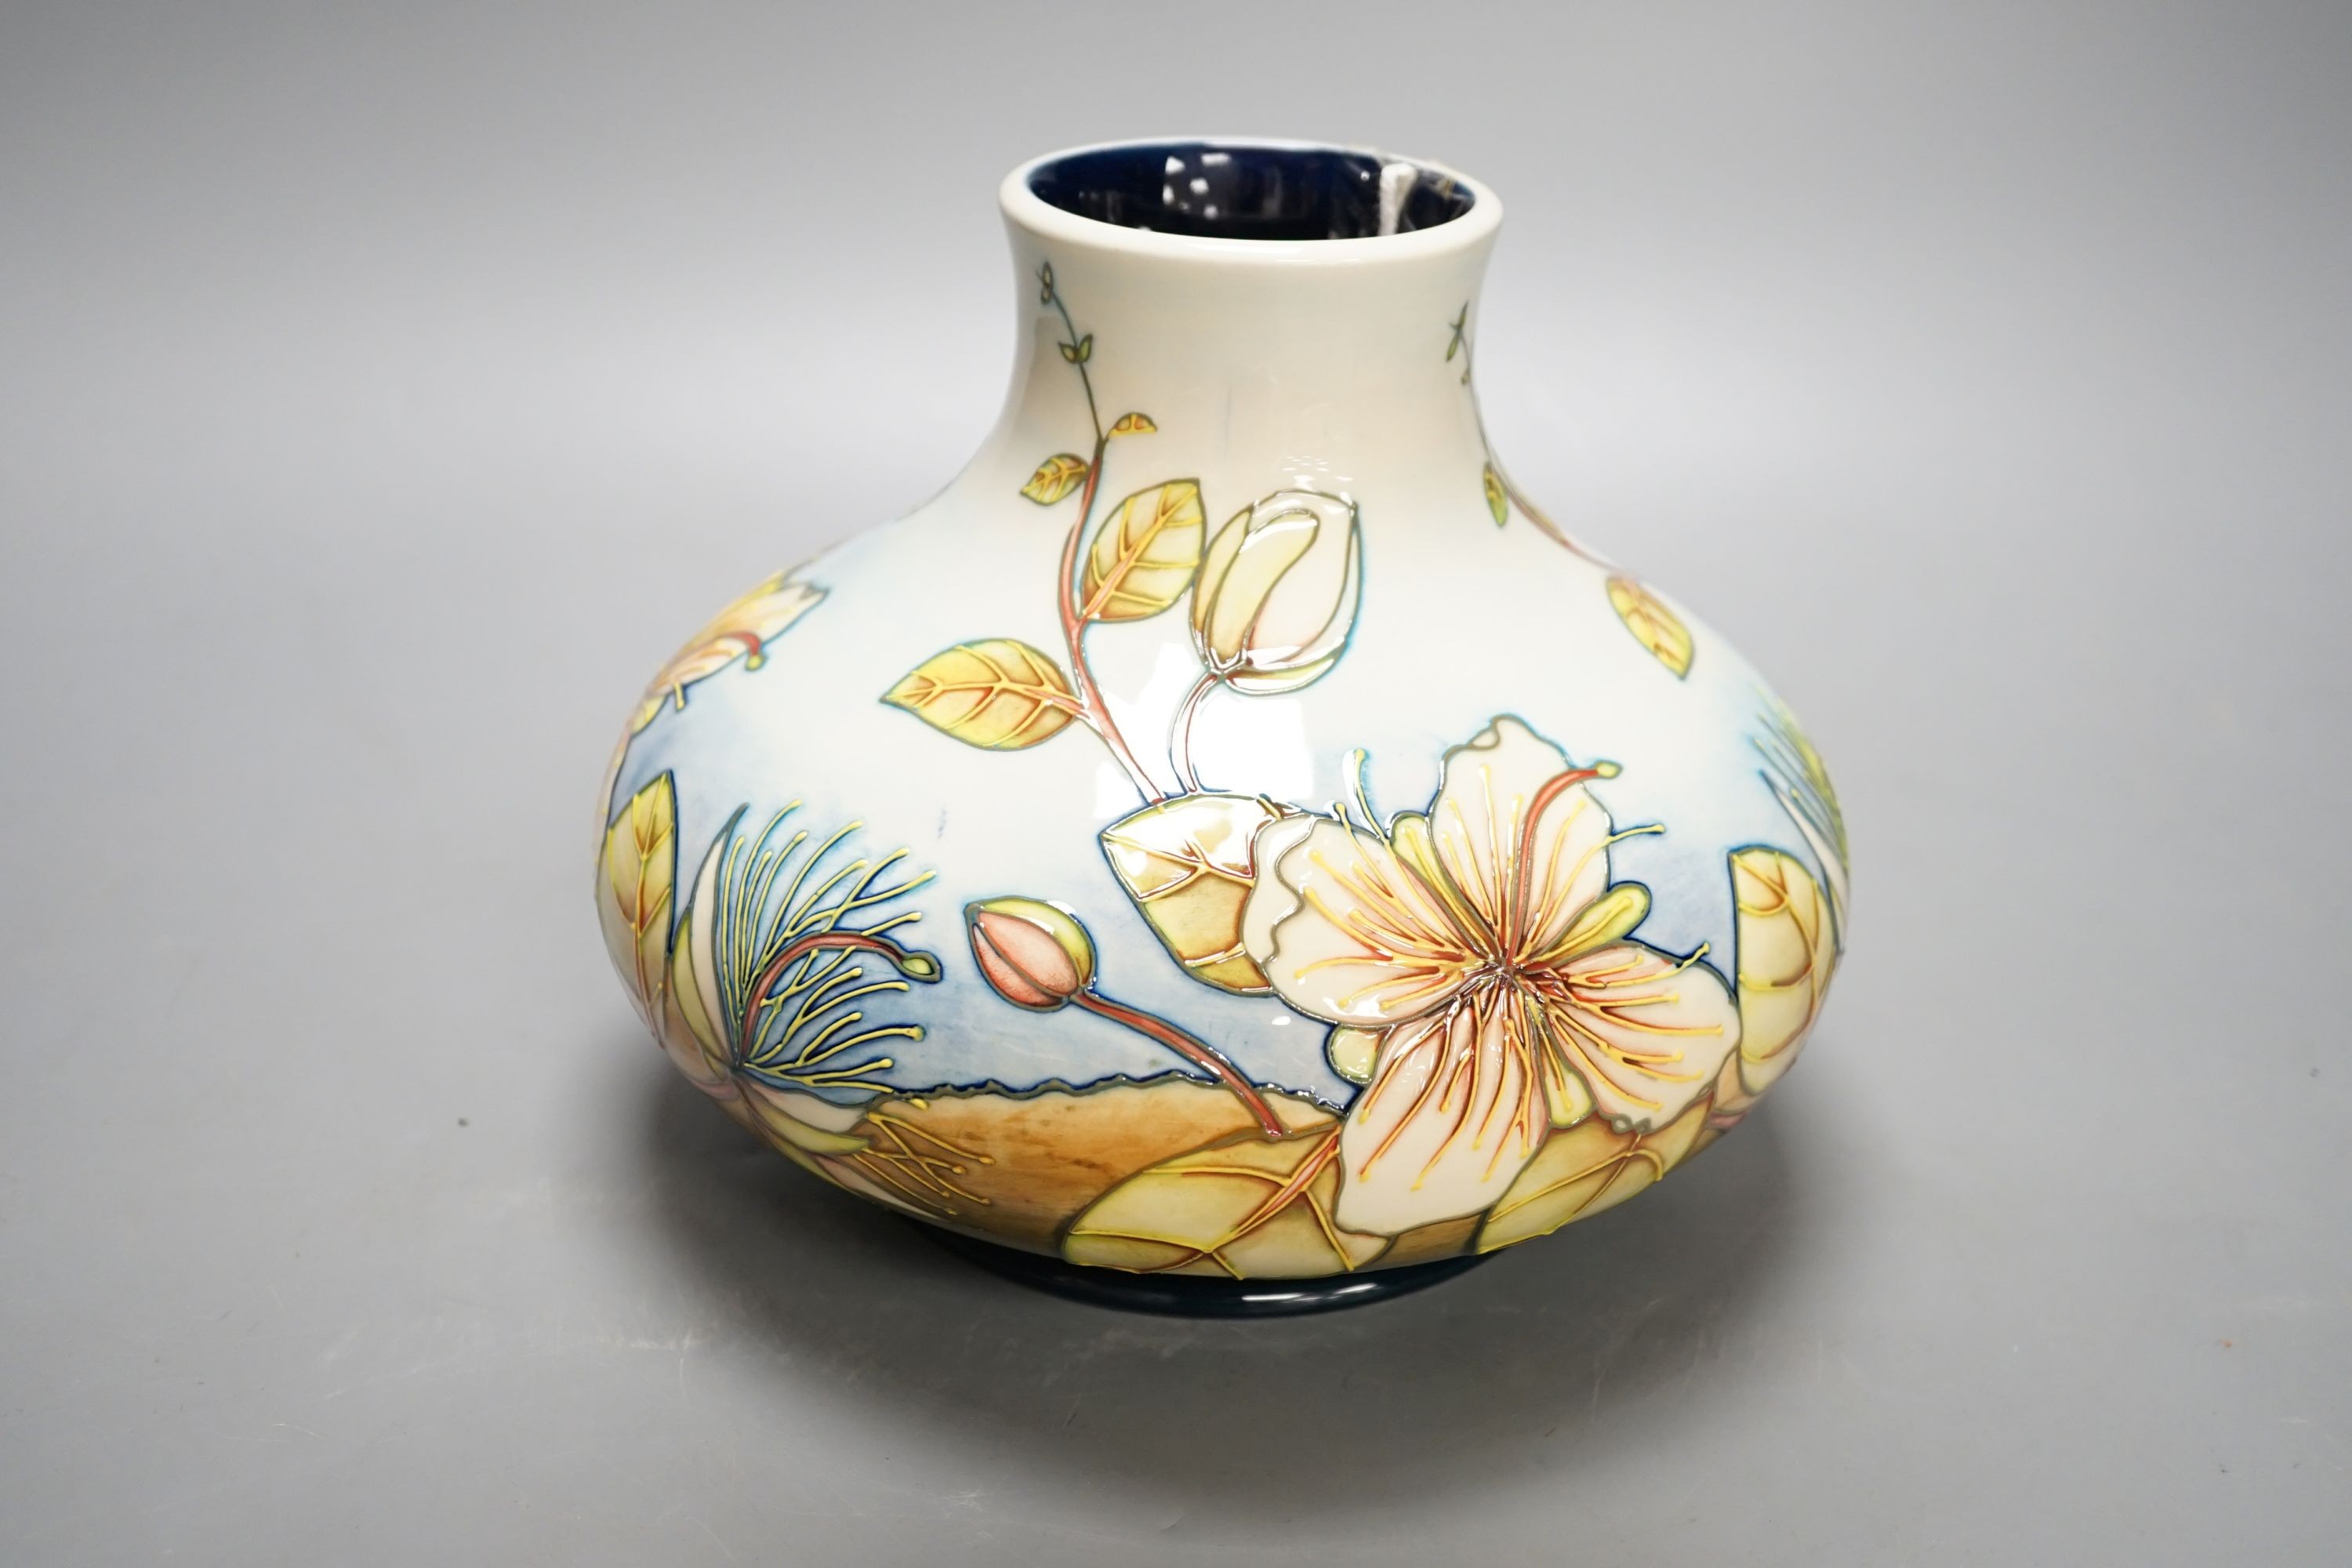 A Moorcroft Capers pattern squat baluster vase, dated 2000, signed Anji Davenport, Limited edition - Image 3 of 5